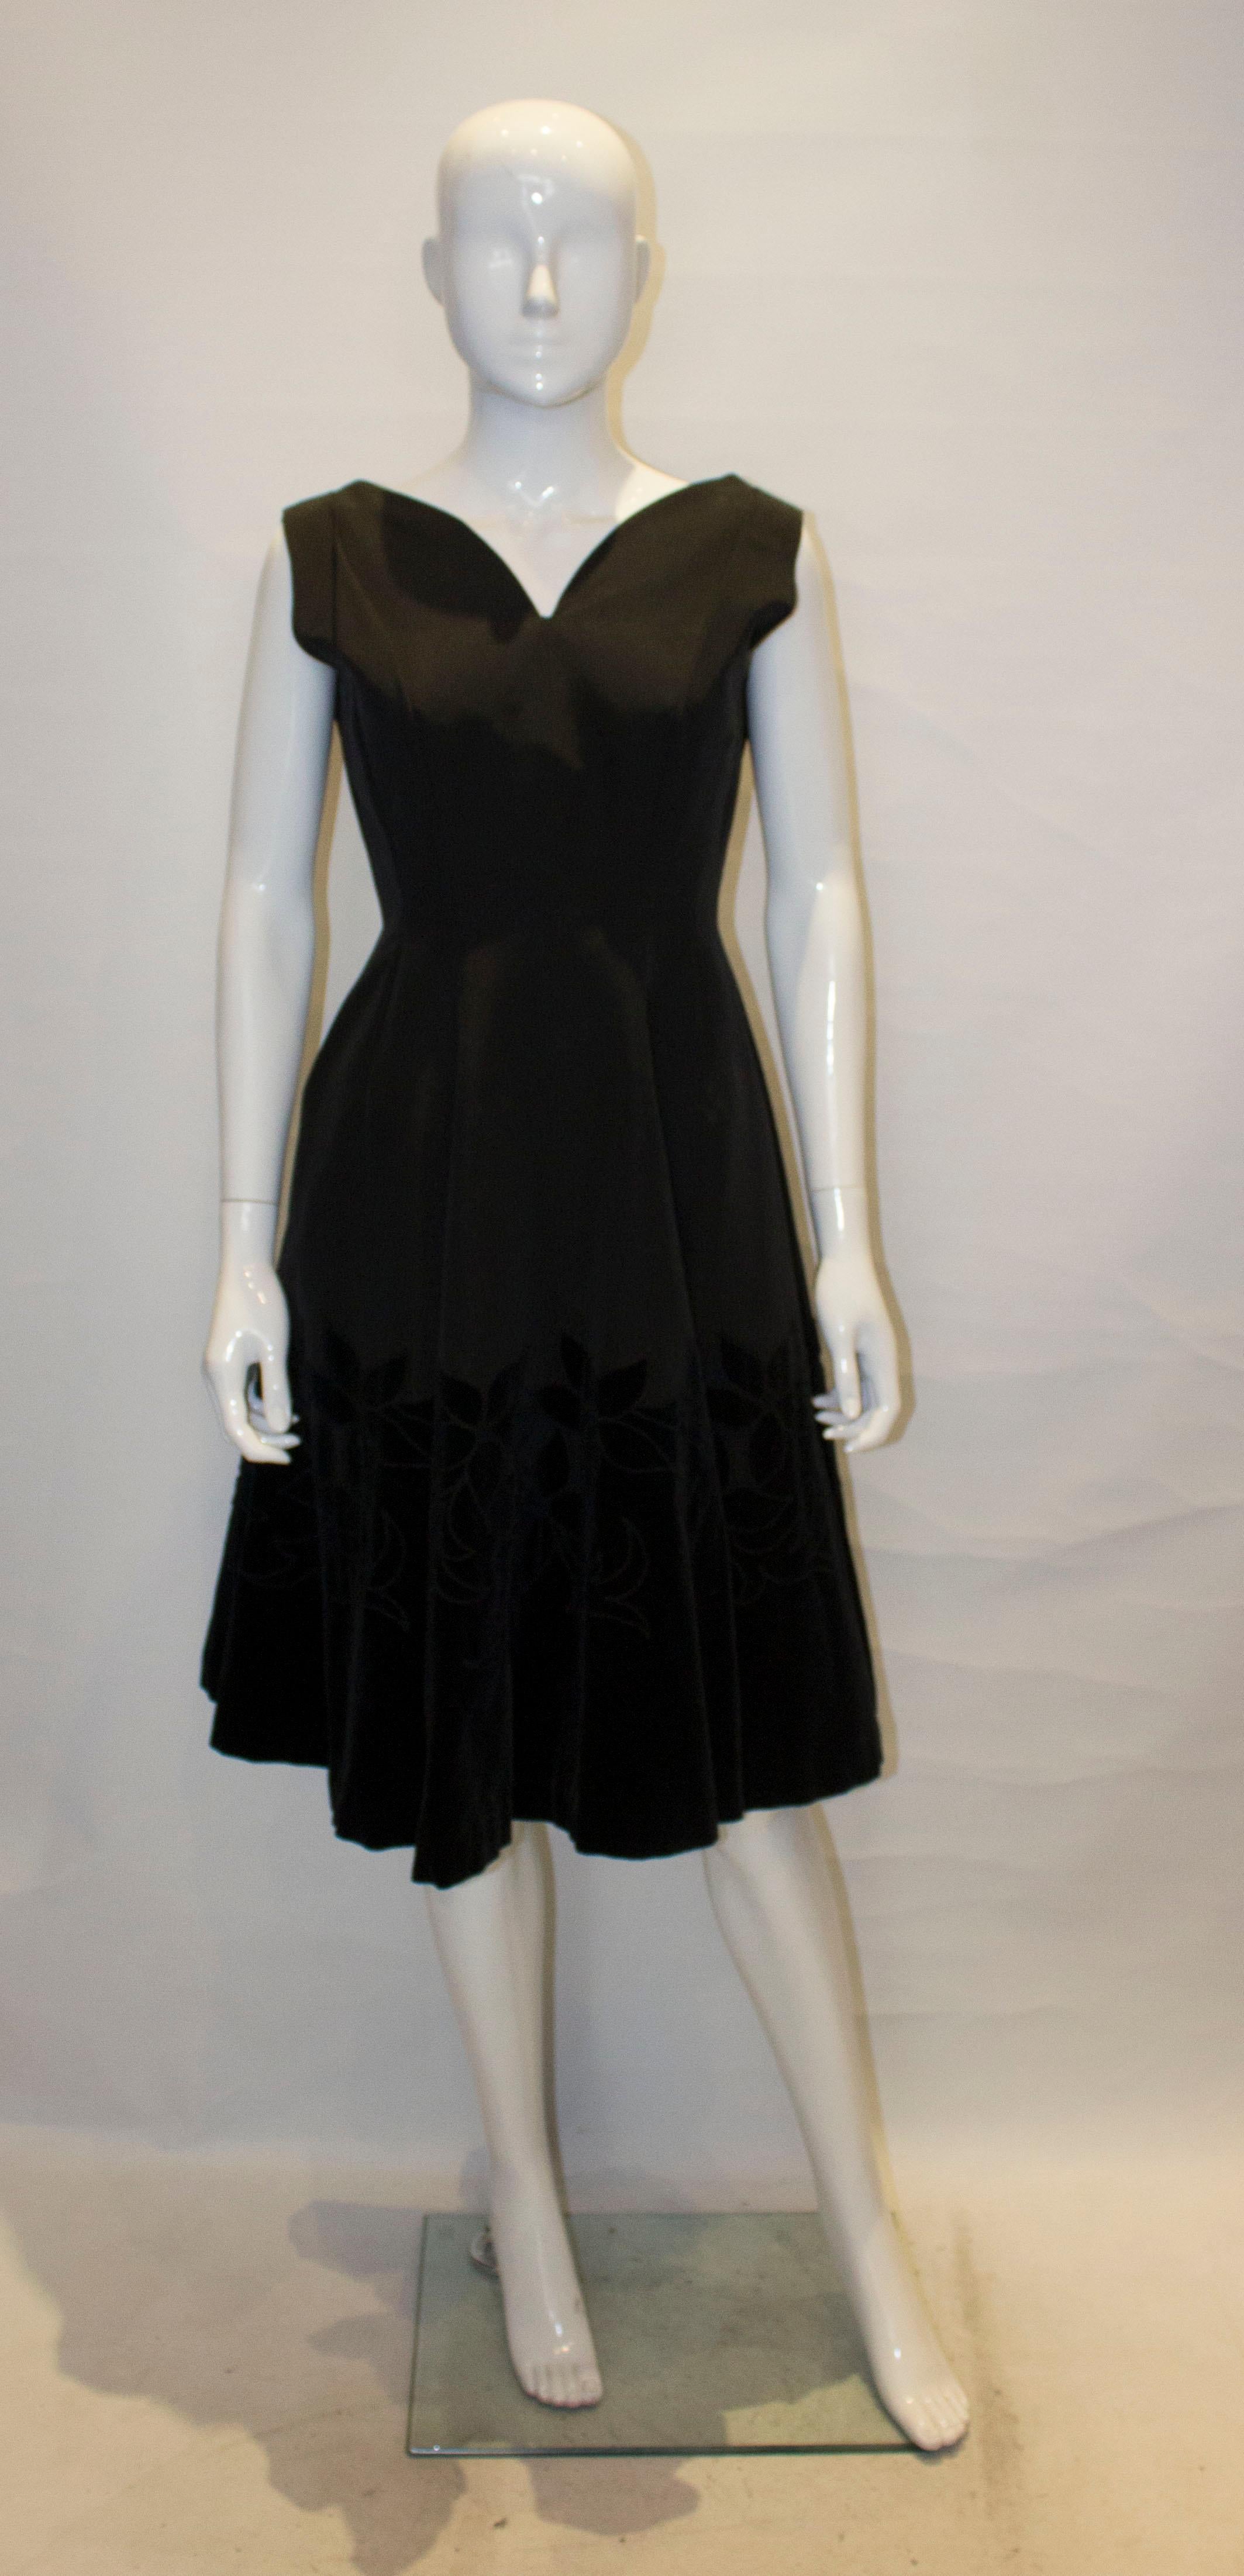 A head turning cocktail dress from the 1950s. The dress has a deep v neckline and backline. with a flared skirt and wonderful velvet flowers and detail on the hem.